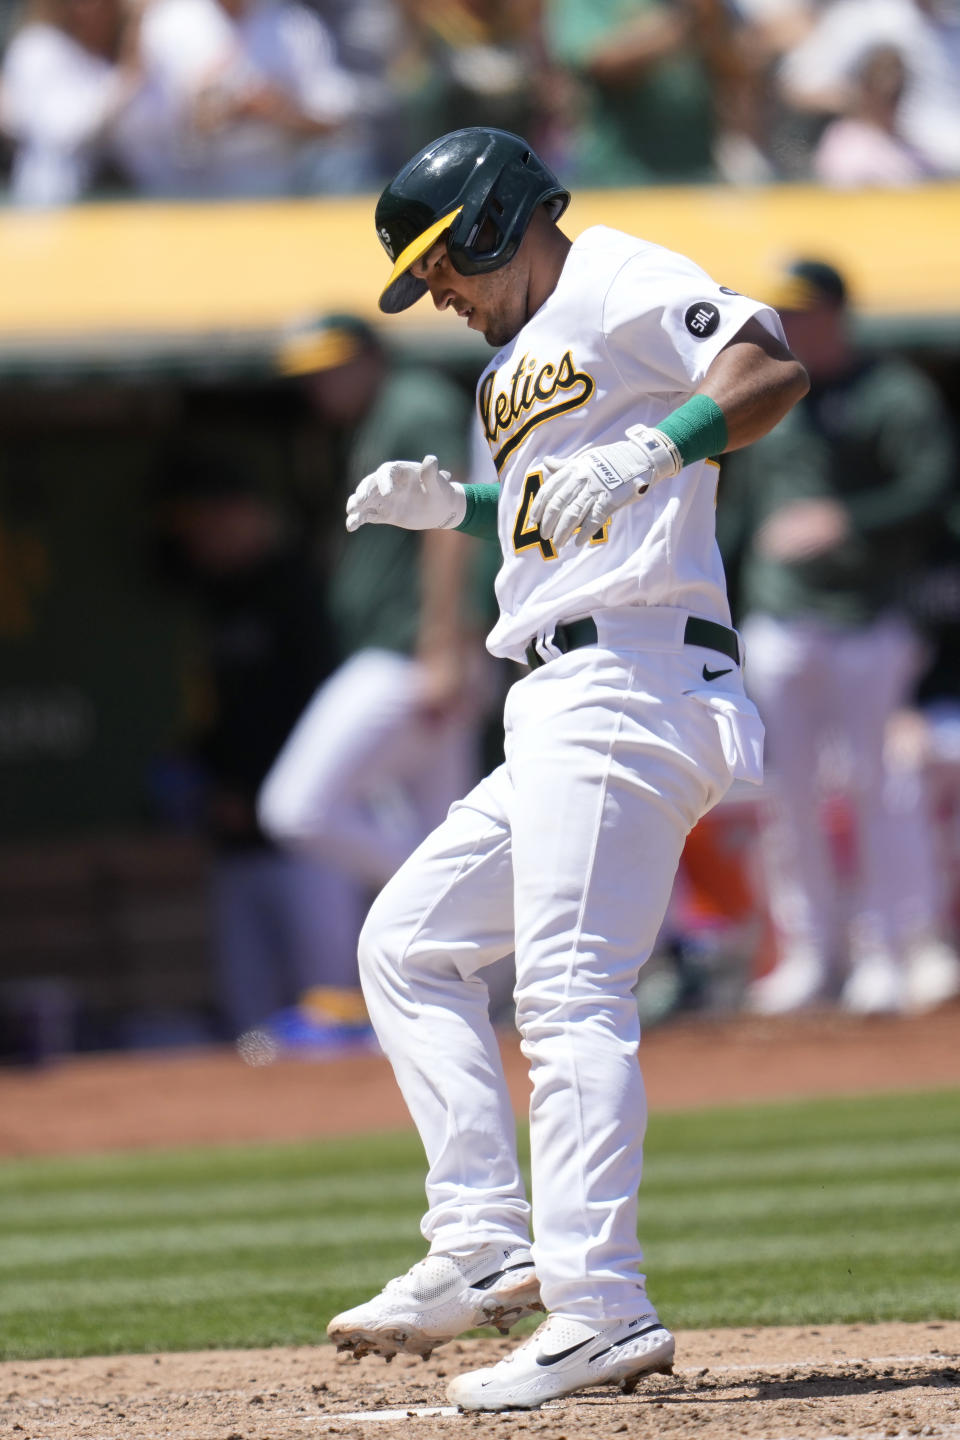 Oakland Athletics' Carlos Perez touches home plate after hitting a home run against the Philadelphia Phillies during the fifth inning of a baseball game in Oakland, Calif., Saturday, June 17, 2023. (AP Photo/Jeff Chiu)